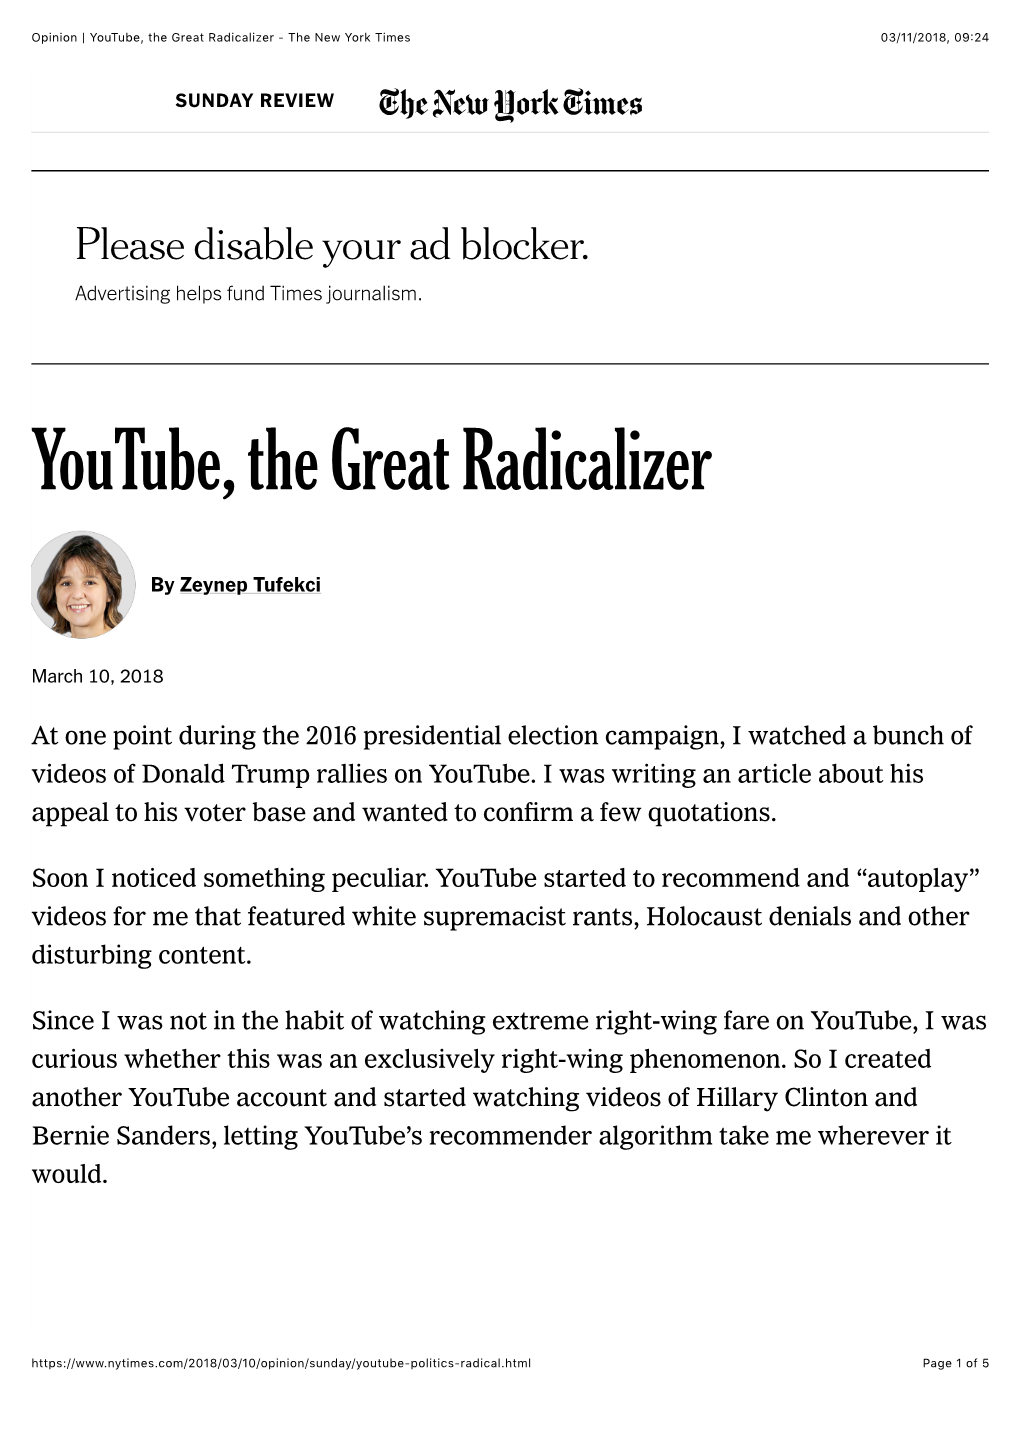 Opinion | Youtube, the Great Radicalizer - the New York Times 03/11/2018, 09�24